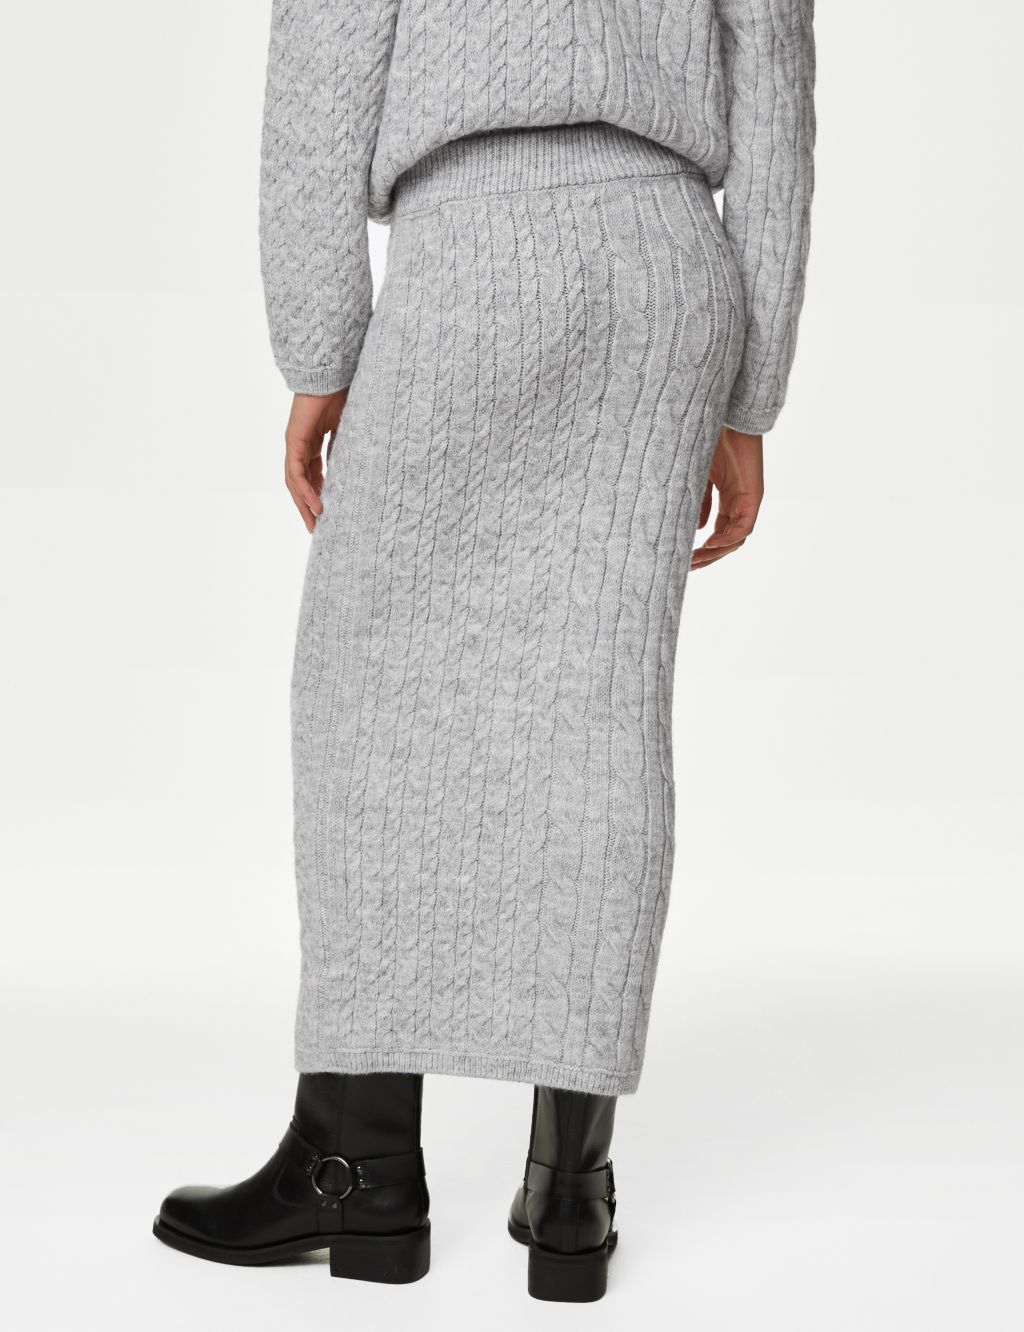 Cable Knit Midi Skirt | M&S Collection | M&S